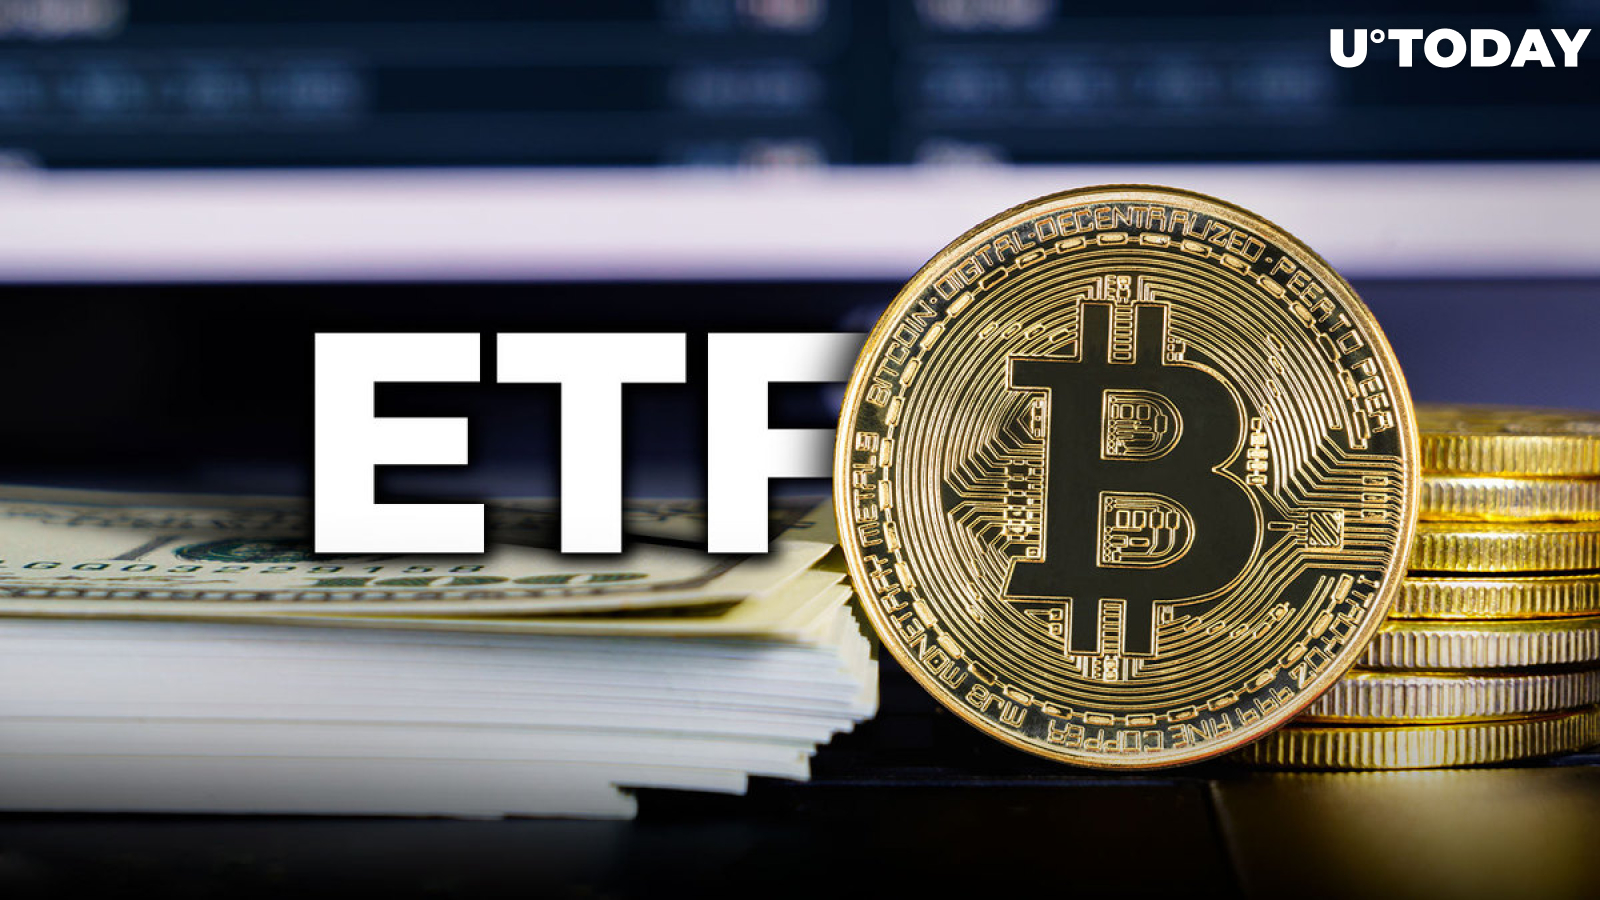 Weekly Crypto Inflow Tops $1 Billion, Bitcoin ETF Shines Strong